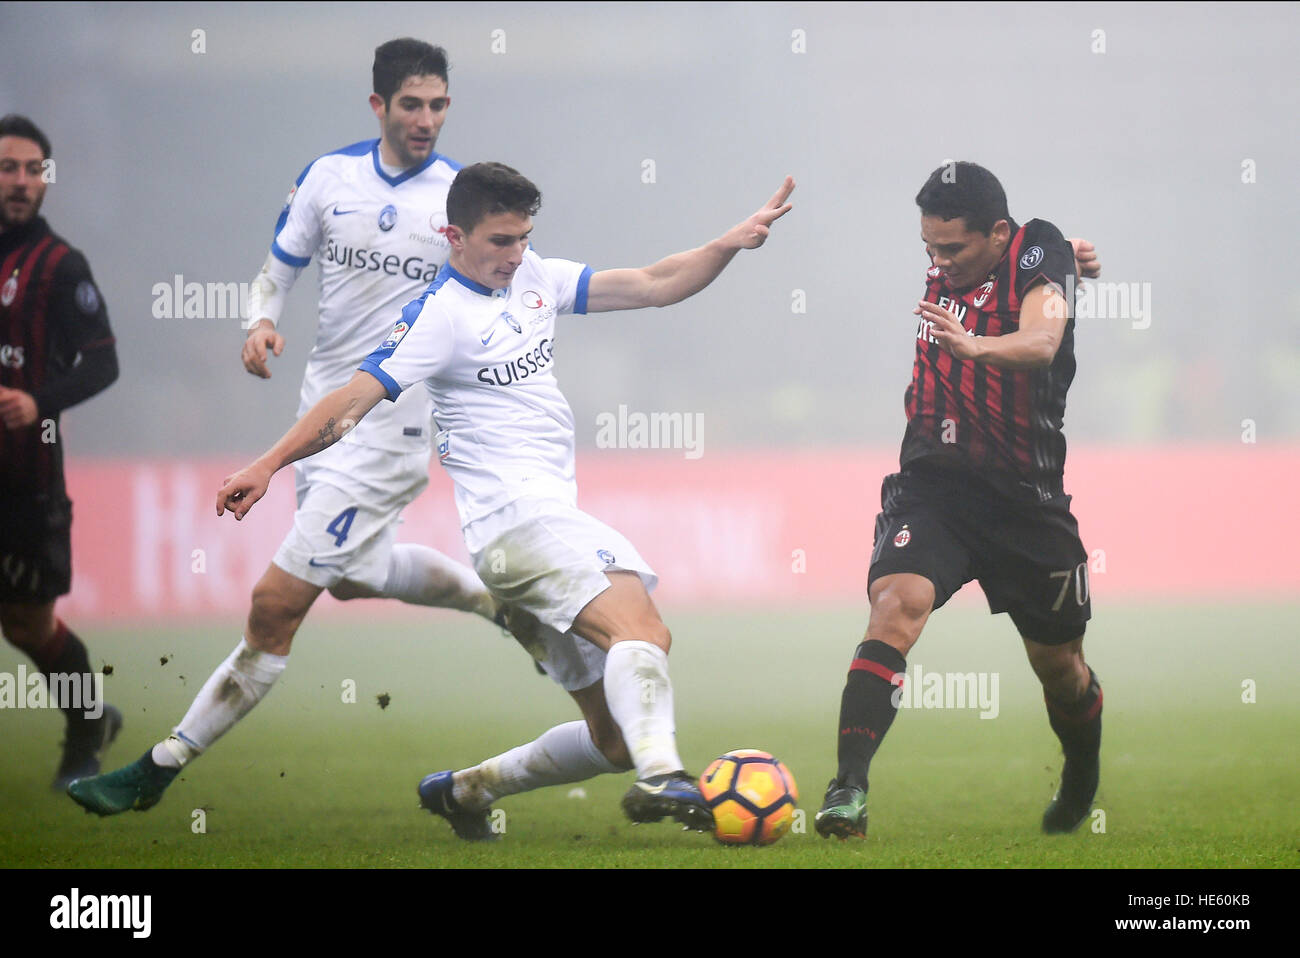 Milan. 17th Dec, 2016. Carlos Bacca (R) of AC Milan competes during the Italian Serie A football match in Milan on Dec. 17, 2016. © Daniele Mascolo/Xinhua/Alamy Live News Stock Photo